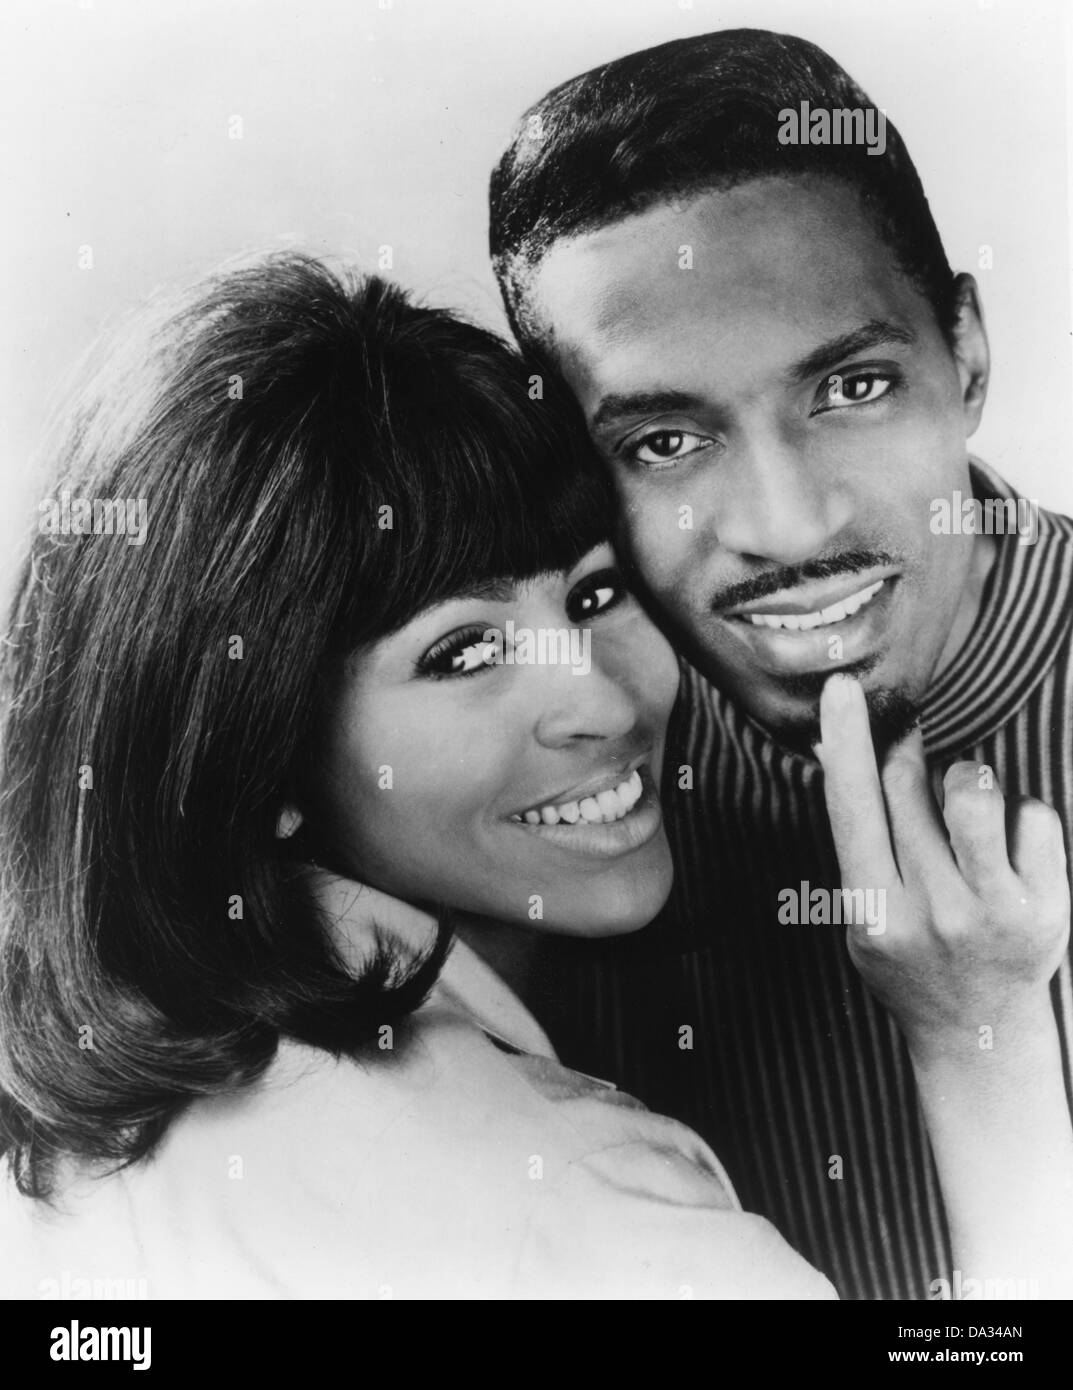 IKE & TINA TURNER Promotional photo of US rock musicians about 1968 Stock Photo